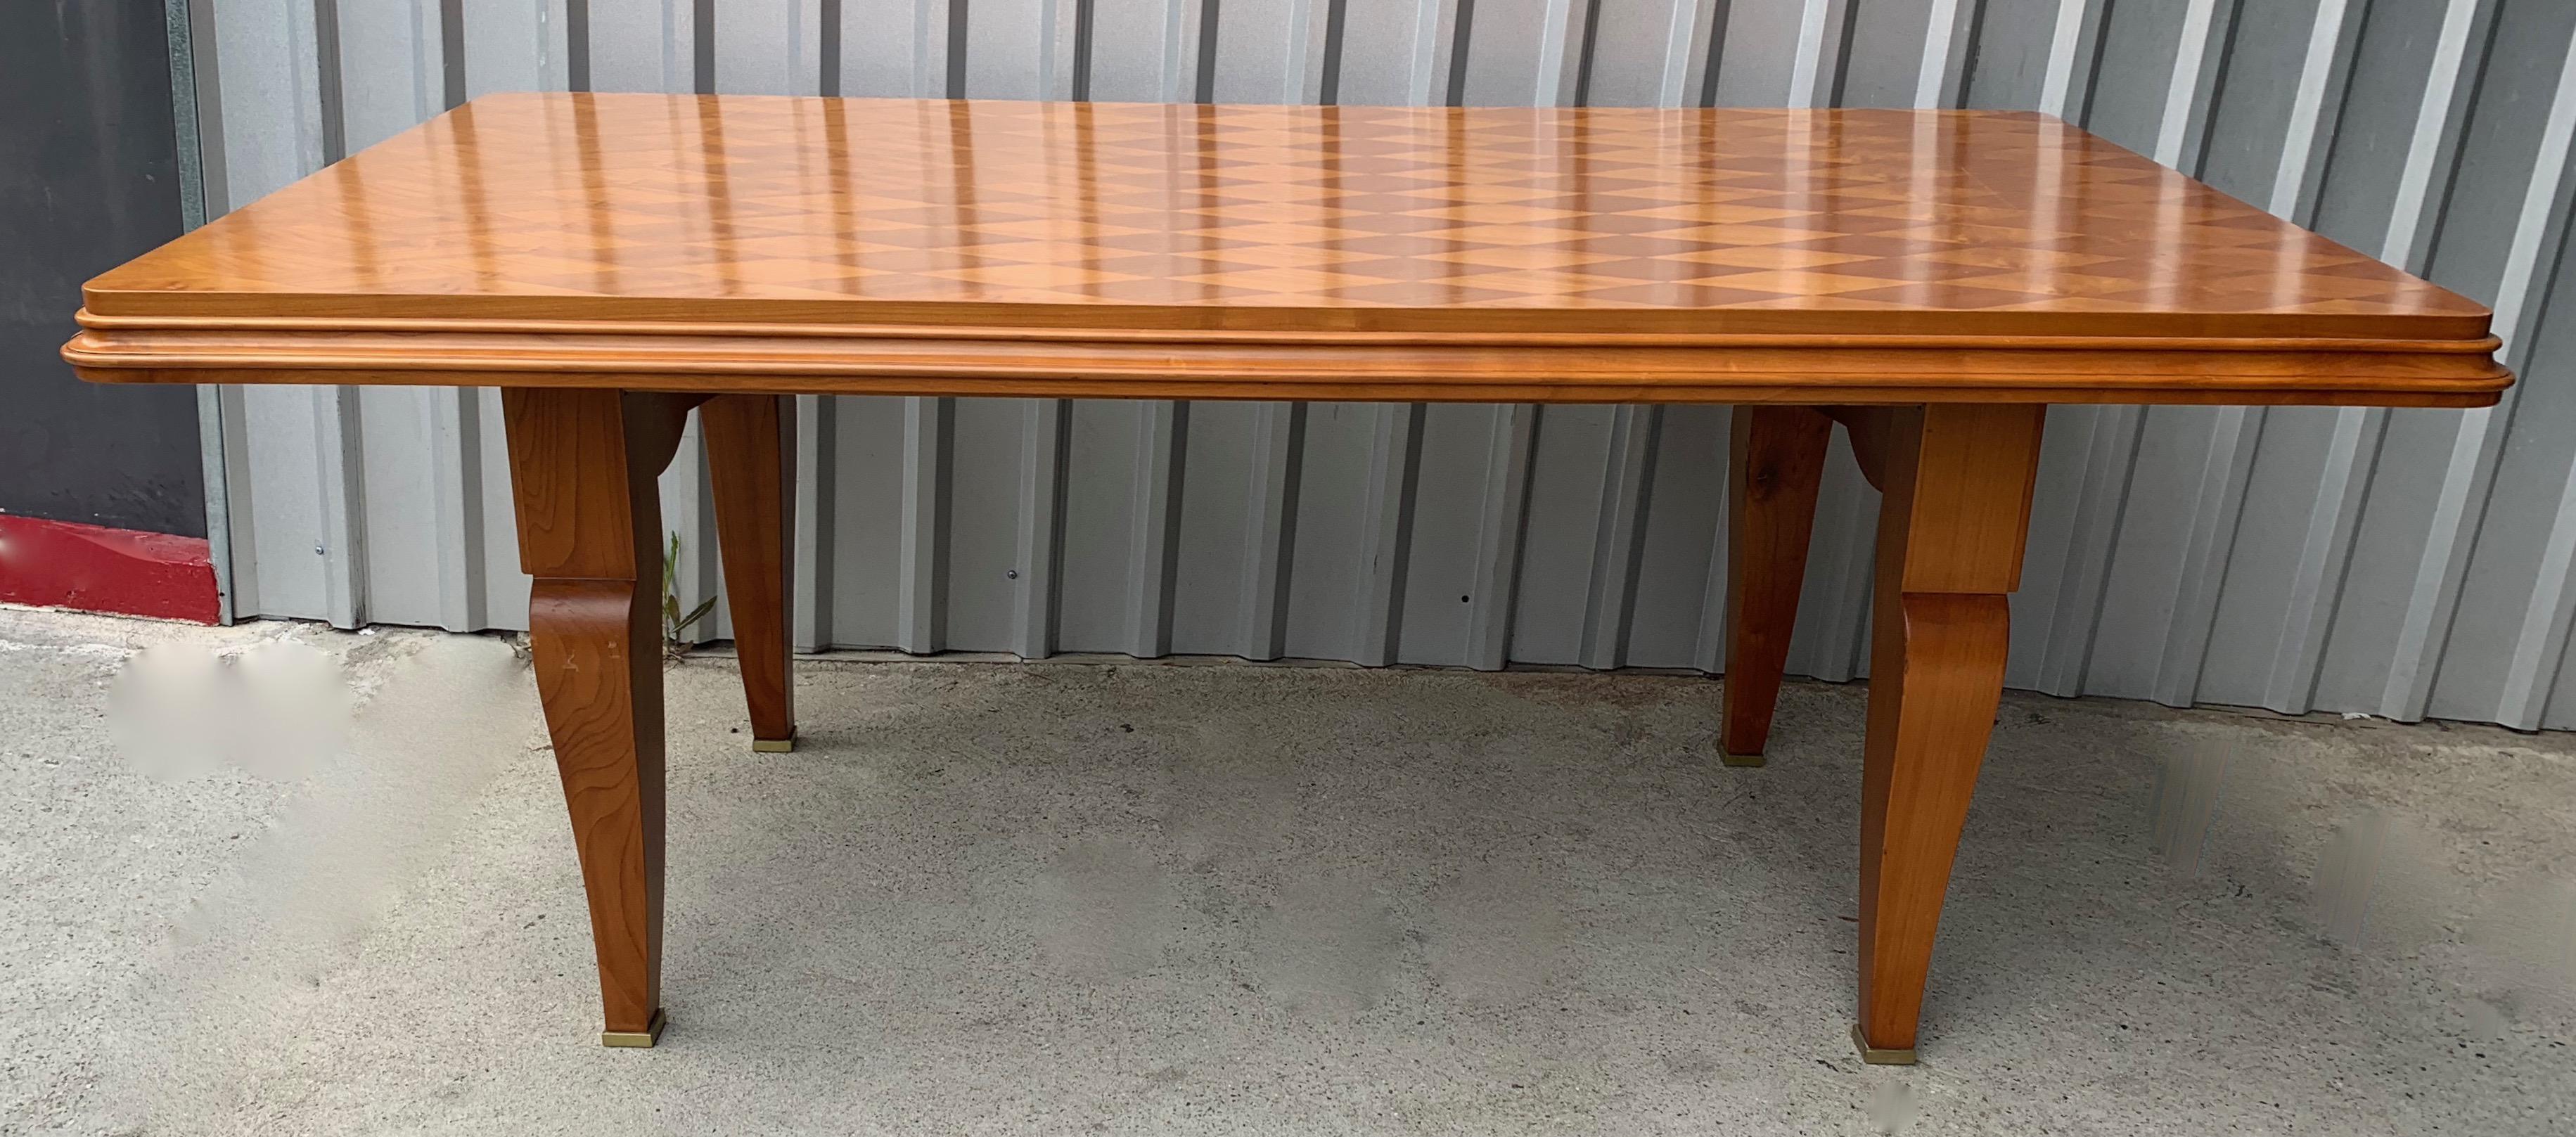 A wonderful French Art Deco dining table with maple harlequin pattern top. Detailed legs with wonderful curves and brass detailing. The piece is an excellent desk. The sides do pullout / pull-out to reveal supports for leaves which are not included